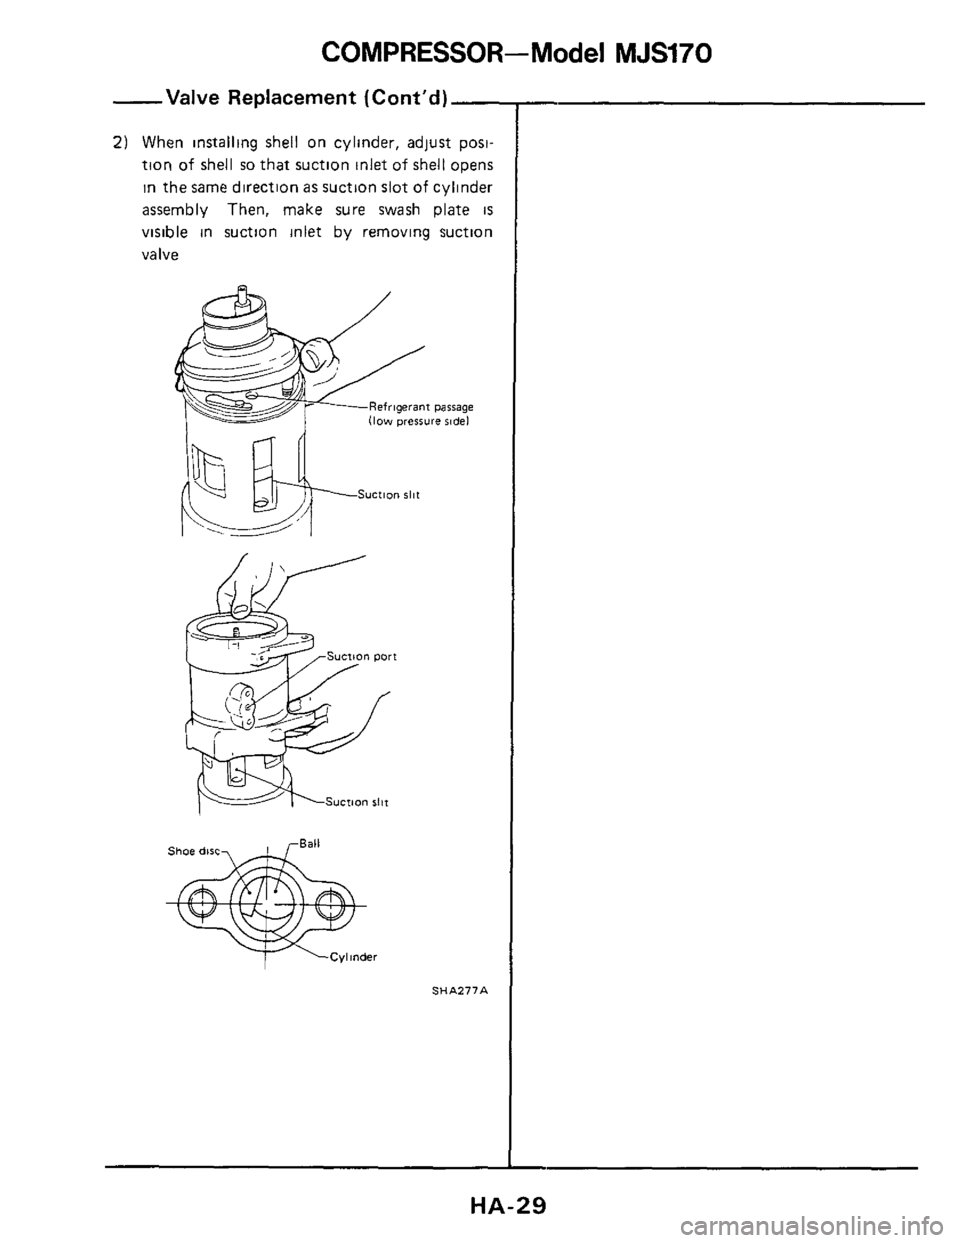 NISSAN 300ZX 1984 Z31 Heather And Air Conditioner Owners Manual COMPRESSOR-Model MJS170 
-Valve Replacement (Cont’d)- 
2) When installing shell on cylinder,  adjust post- 
tion 
of shell so that  suction  inlet of shell opens 
in the  same direction 
as suction 